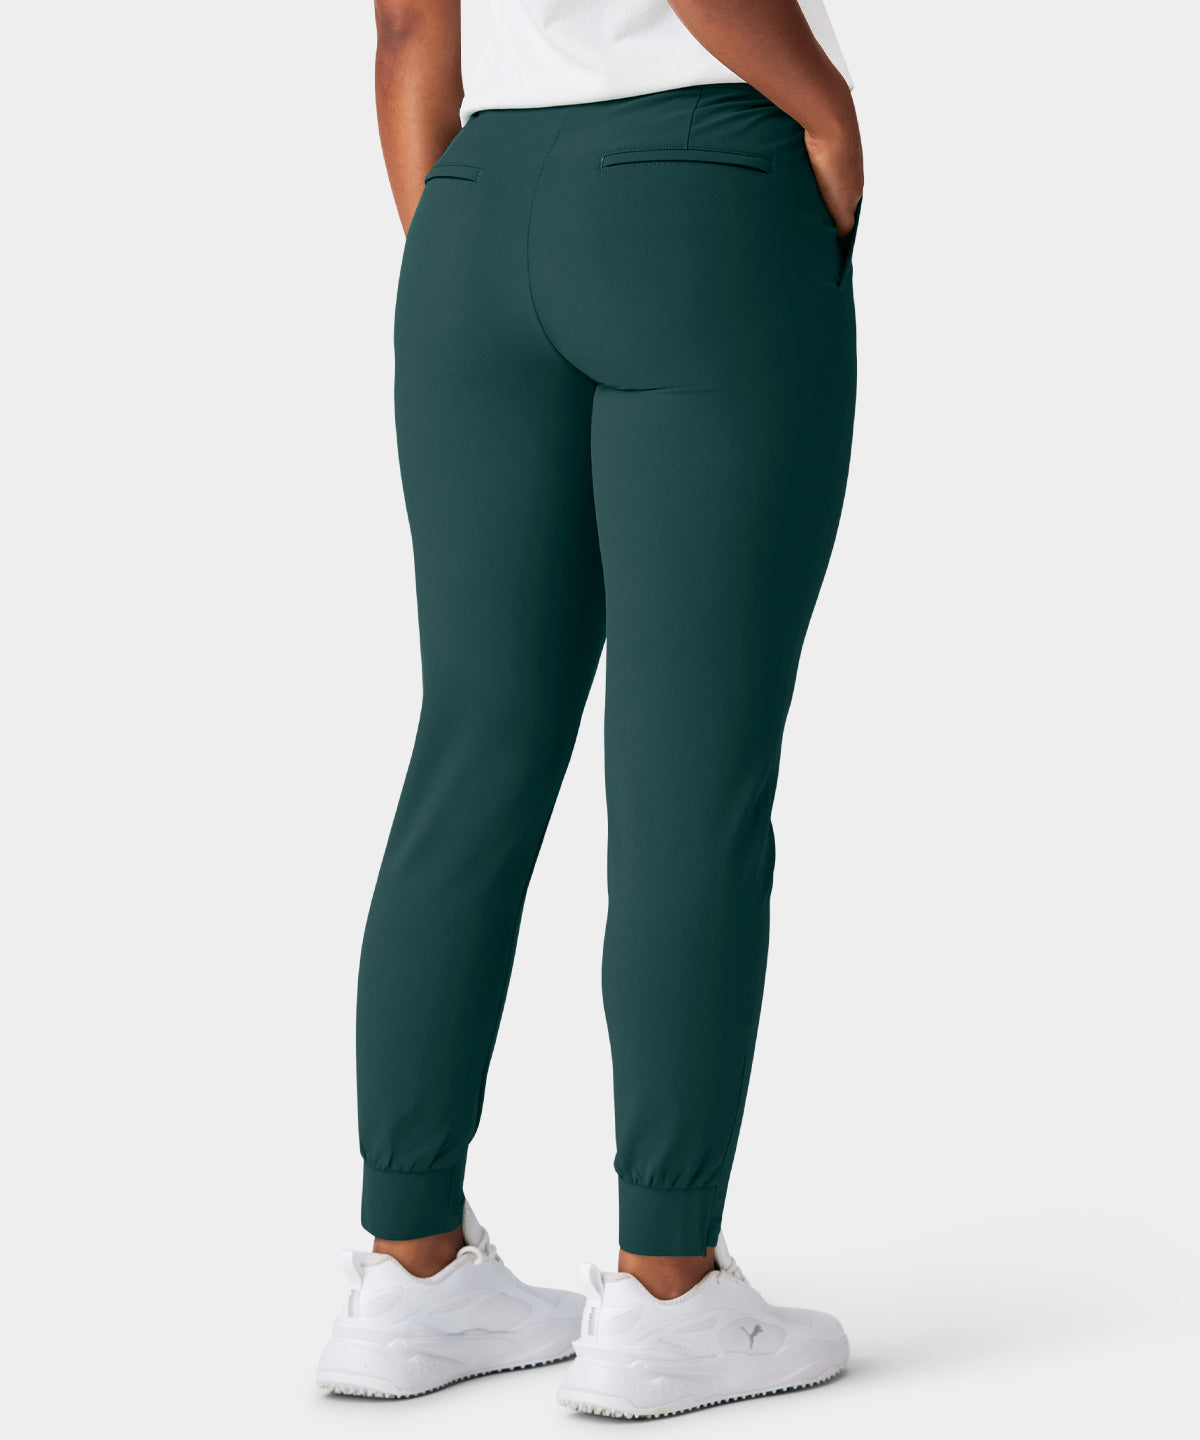 Nora Teal Trouser